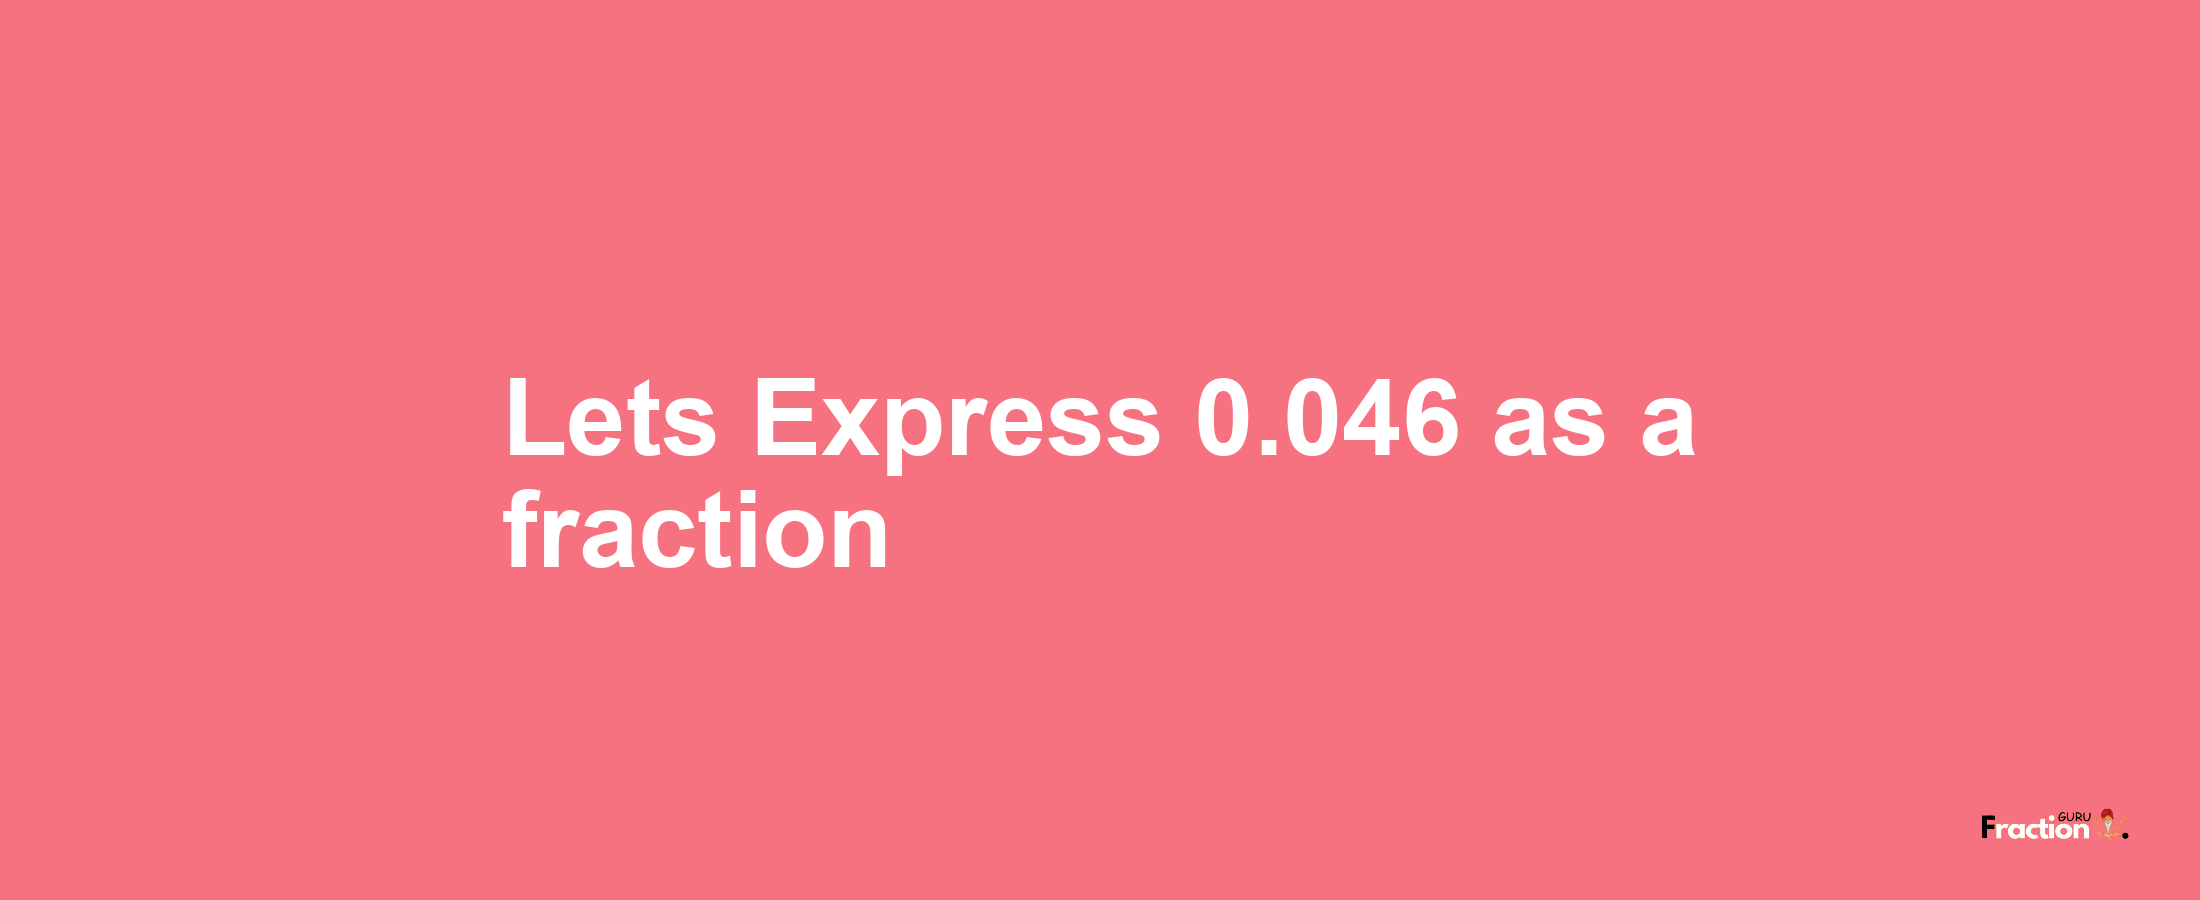 Lets Express 0.046 as afraction